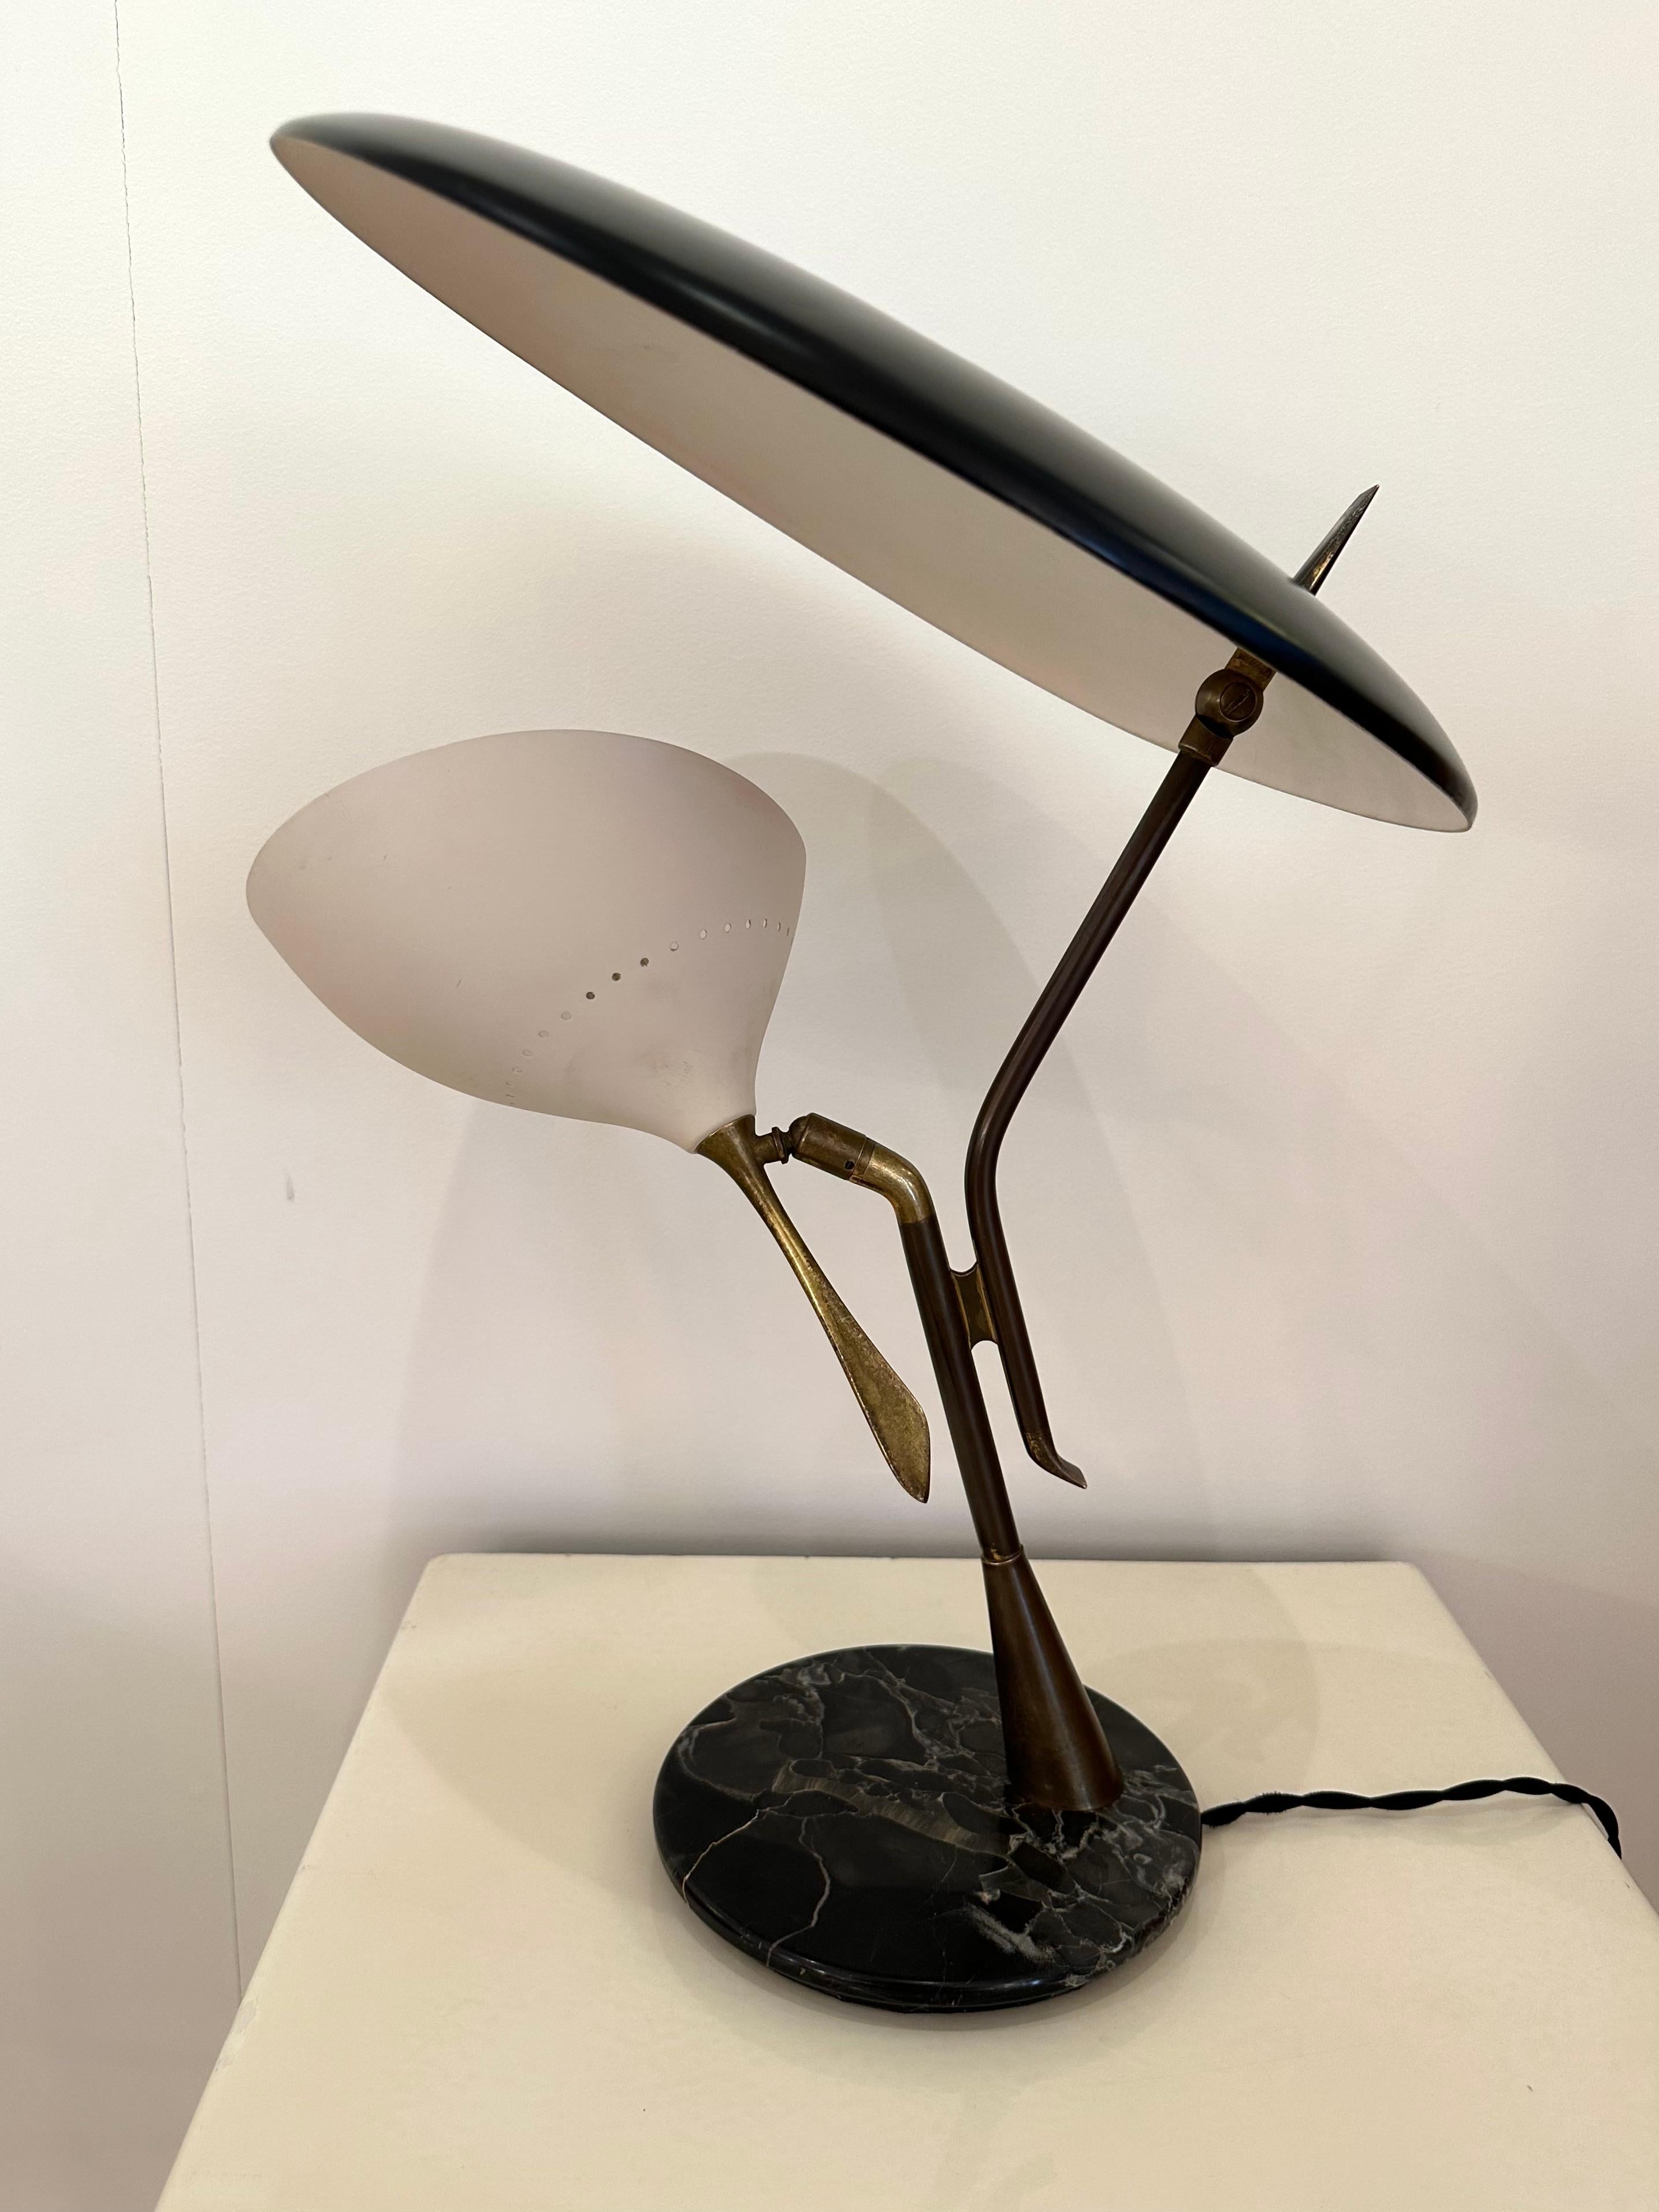 Midcentury Desk Lamp Painted Metal, Brass, Marble by Lumen, Italy, 1950s For Sale 3